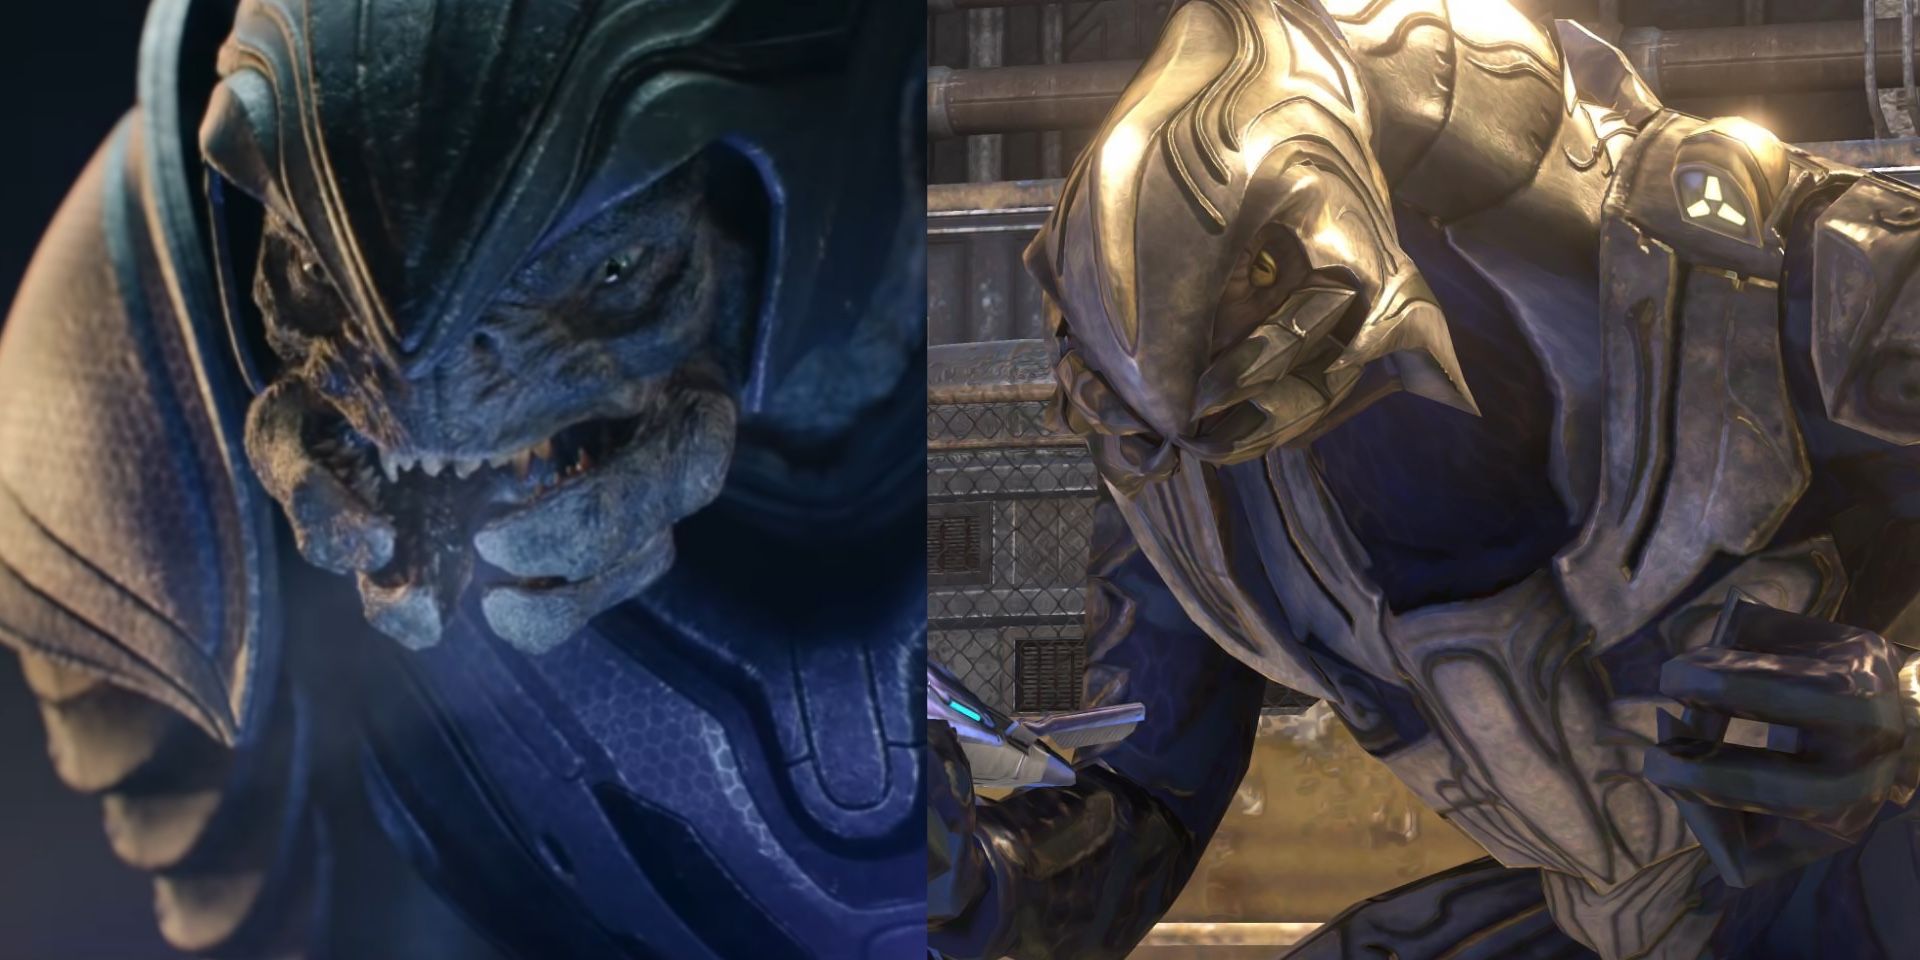 An Arbiter in the Halo TV show and game